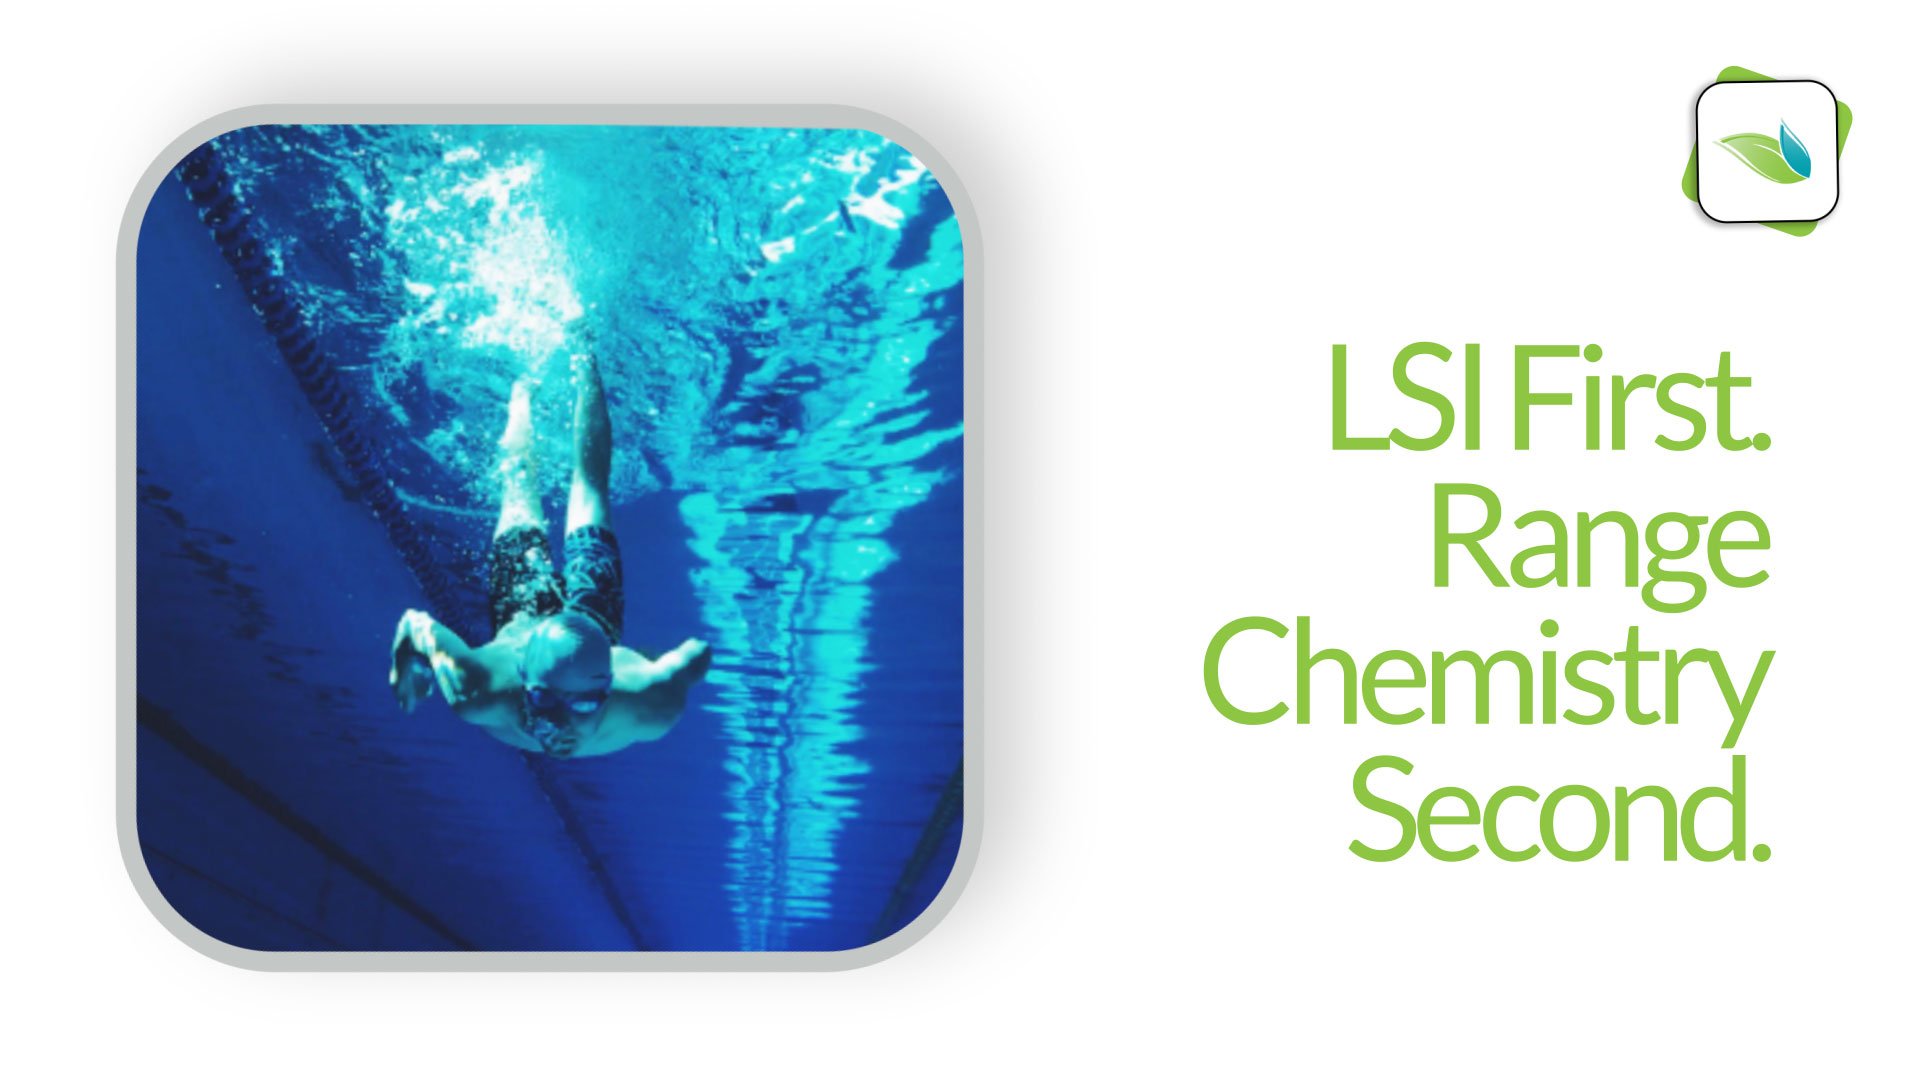 LSI first, Range Chemistry Second